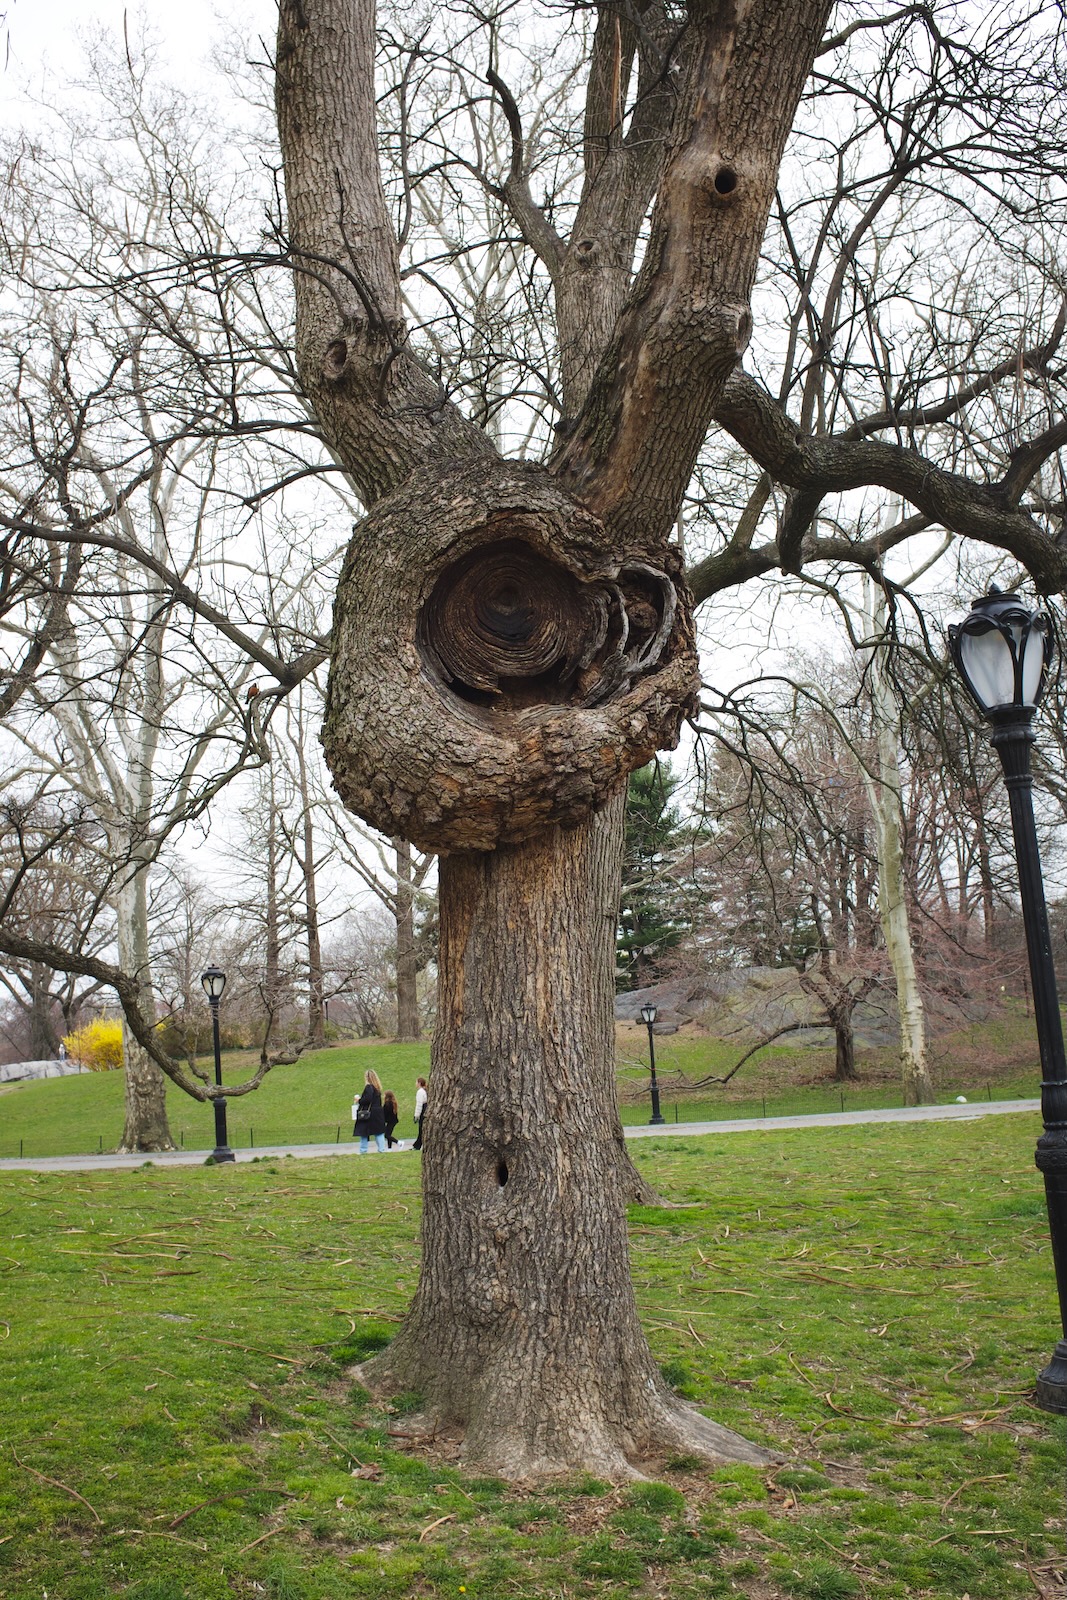 A tree in central park with a massive knot in the center of its trunk.”